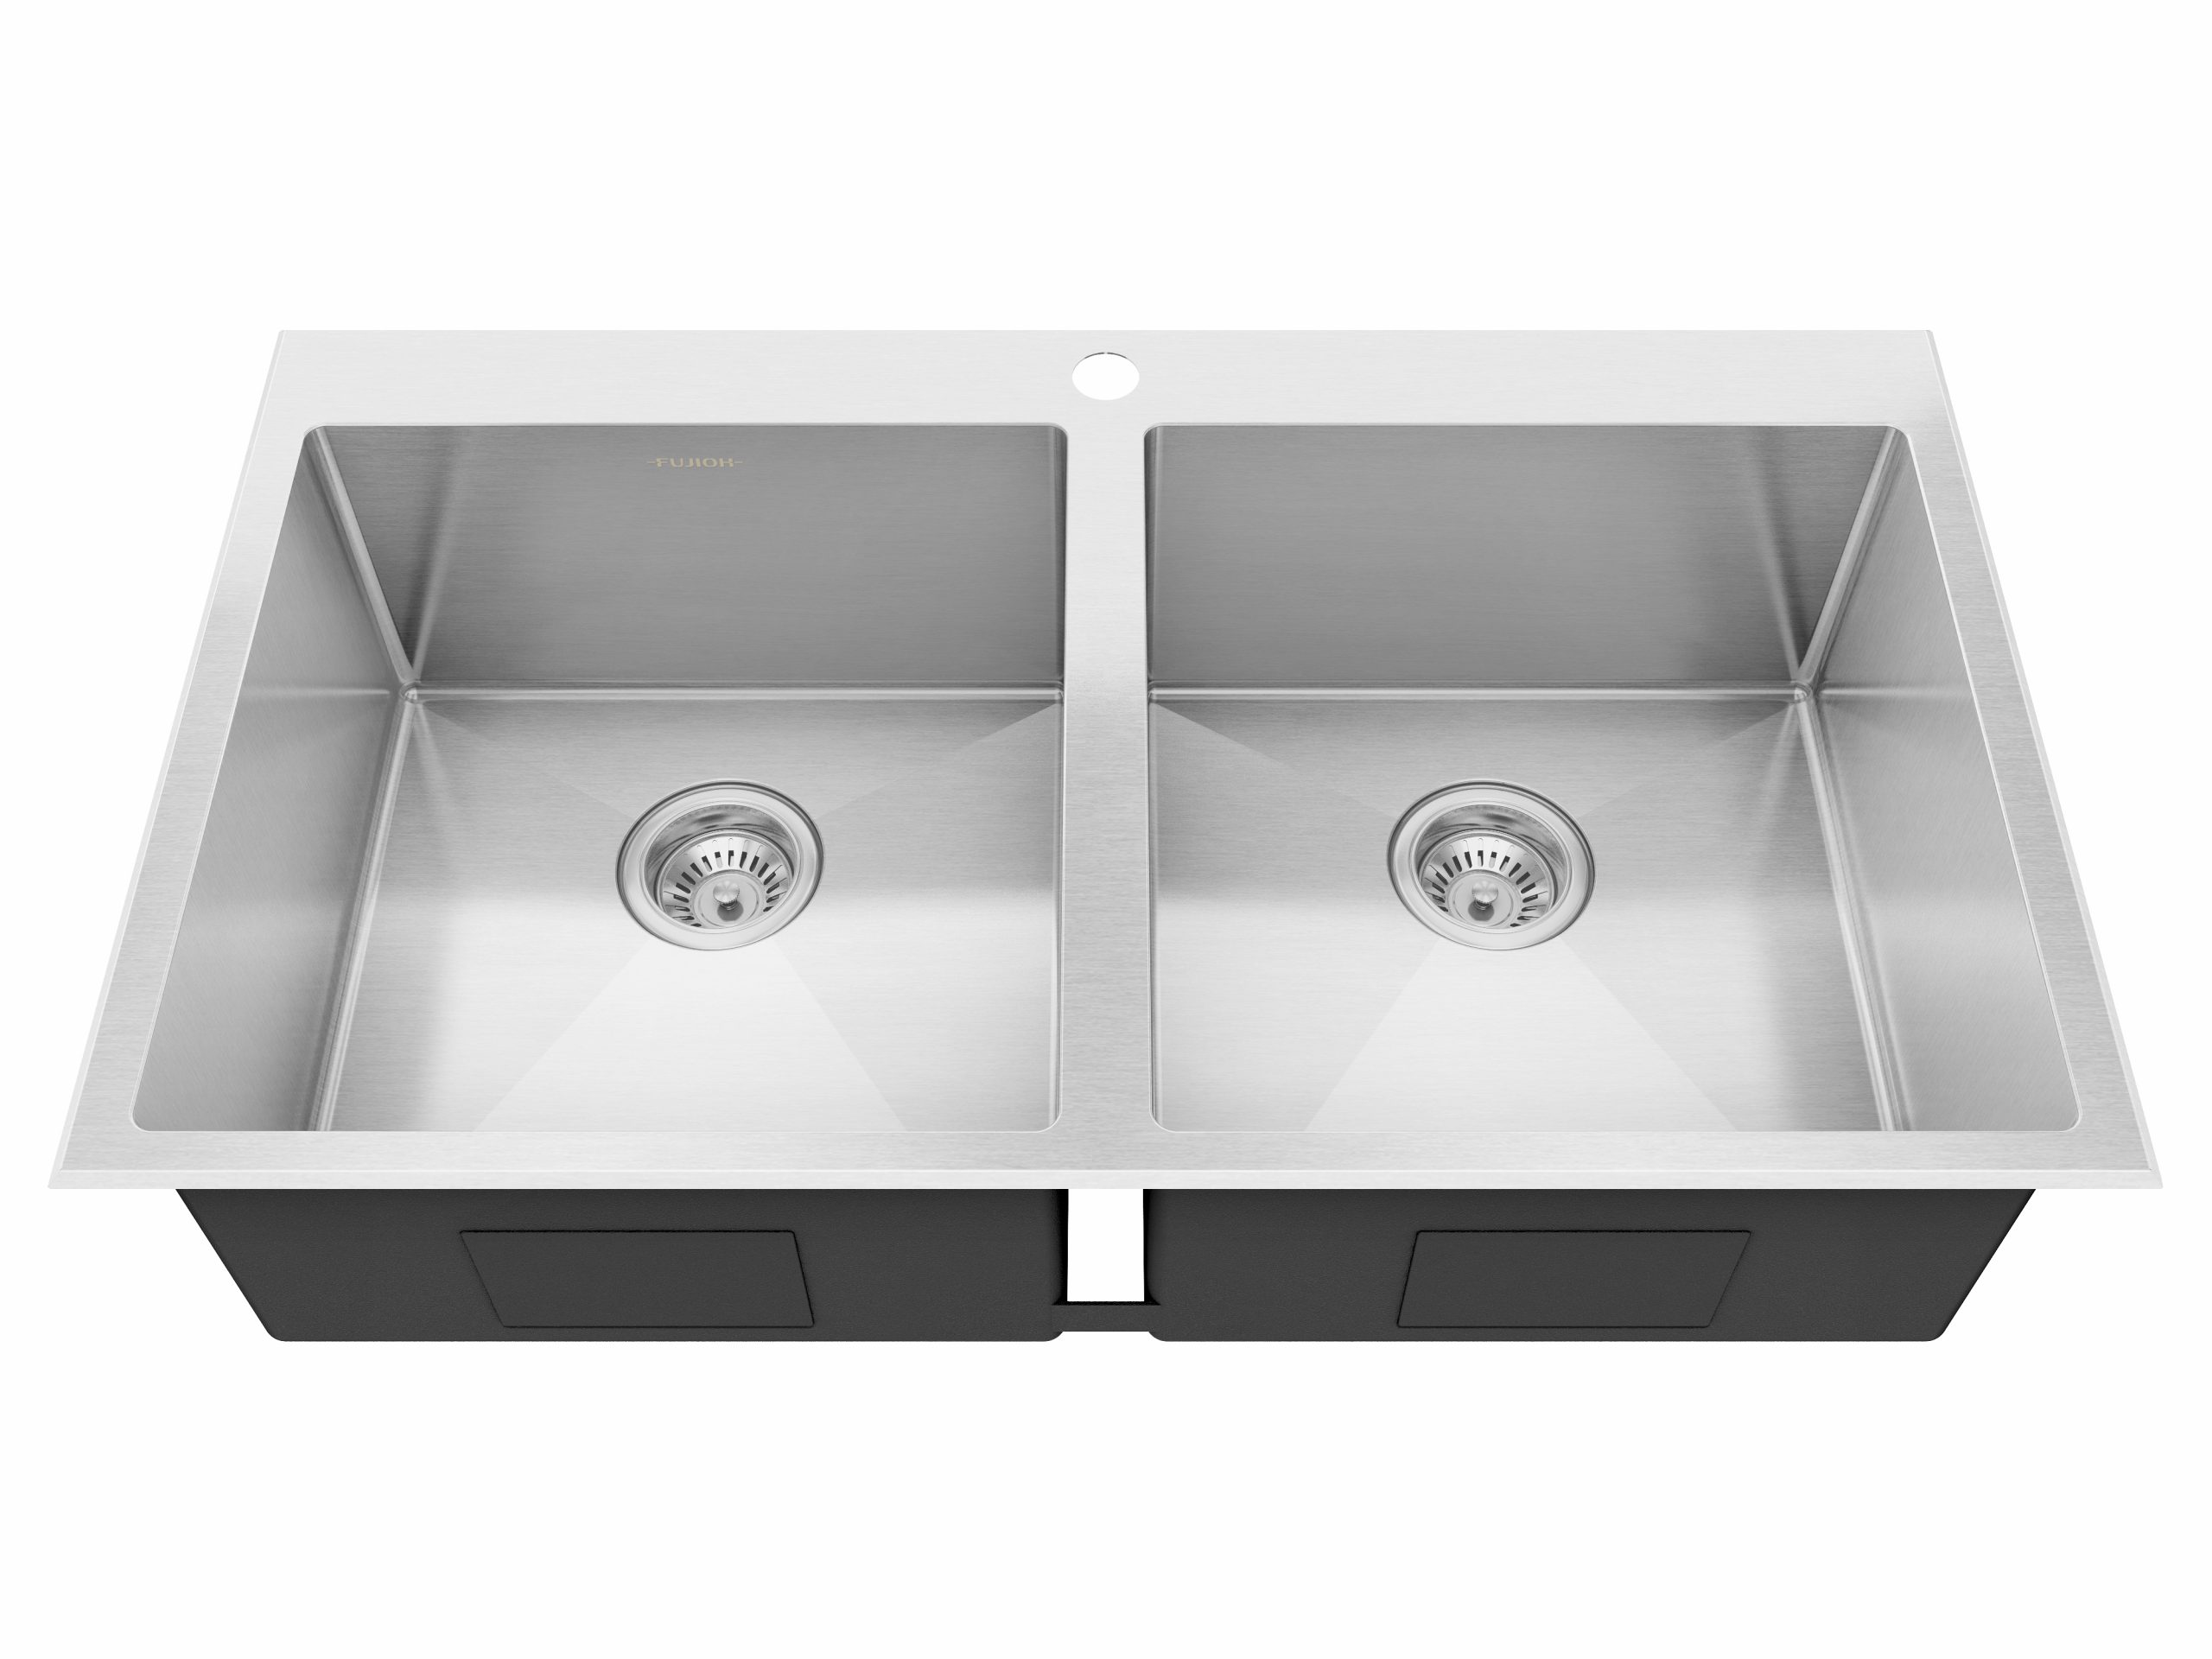 Top Mount Kitchen Sink Double Bowls 390mm + 390mm